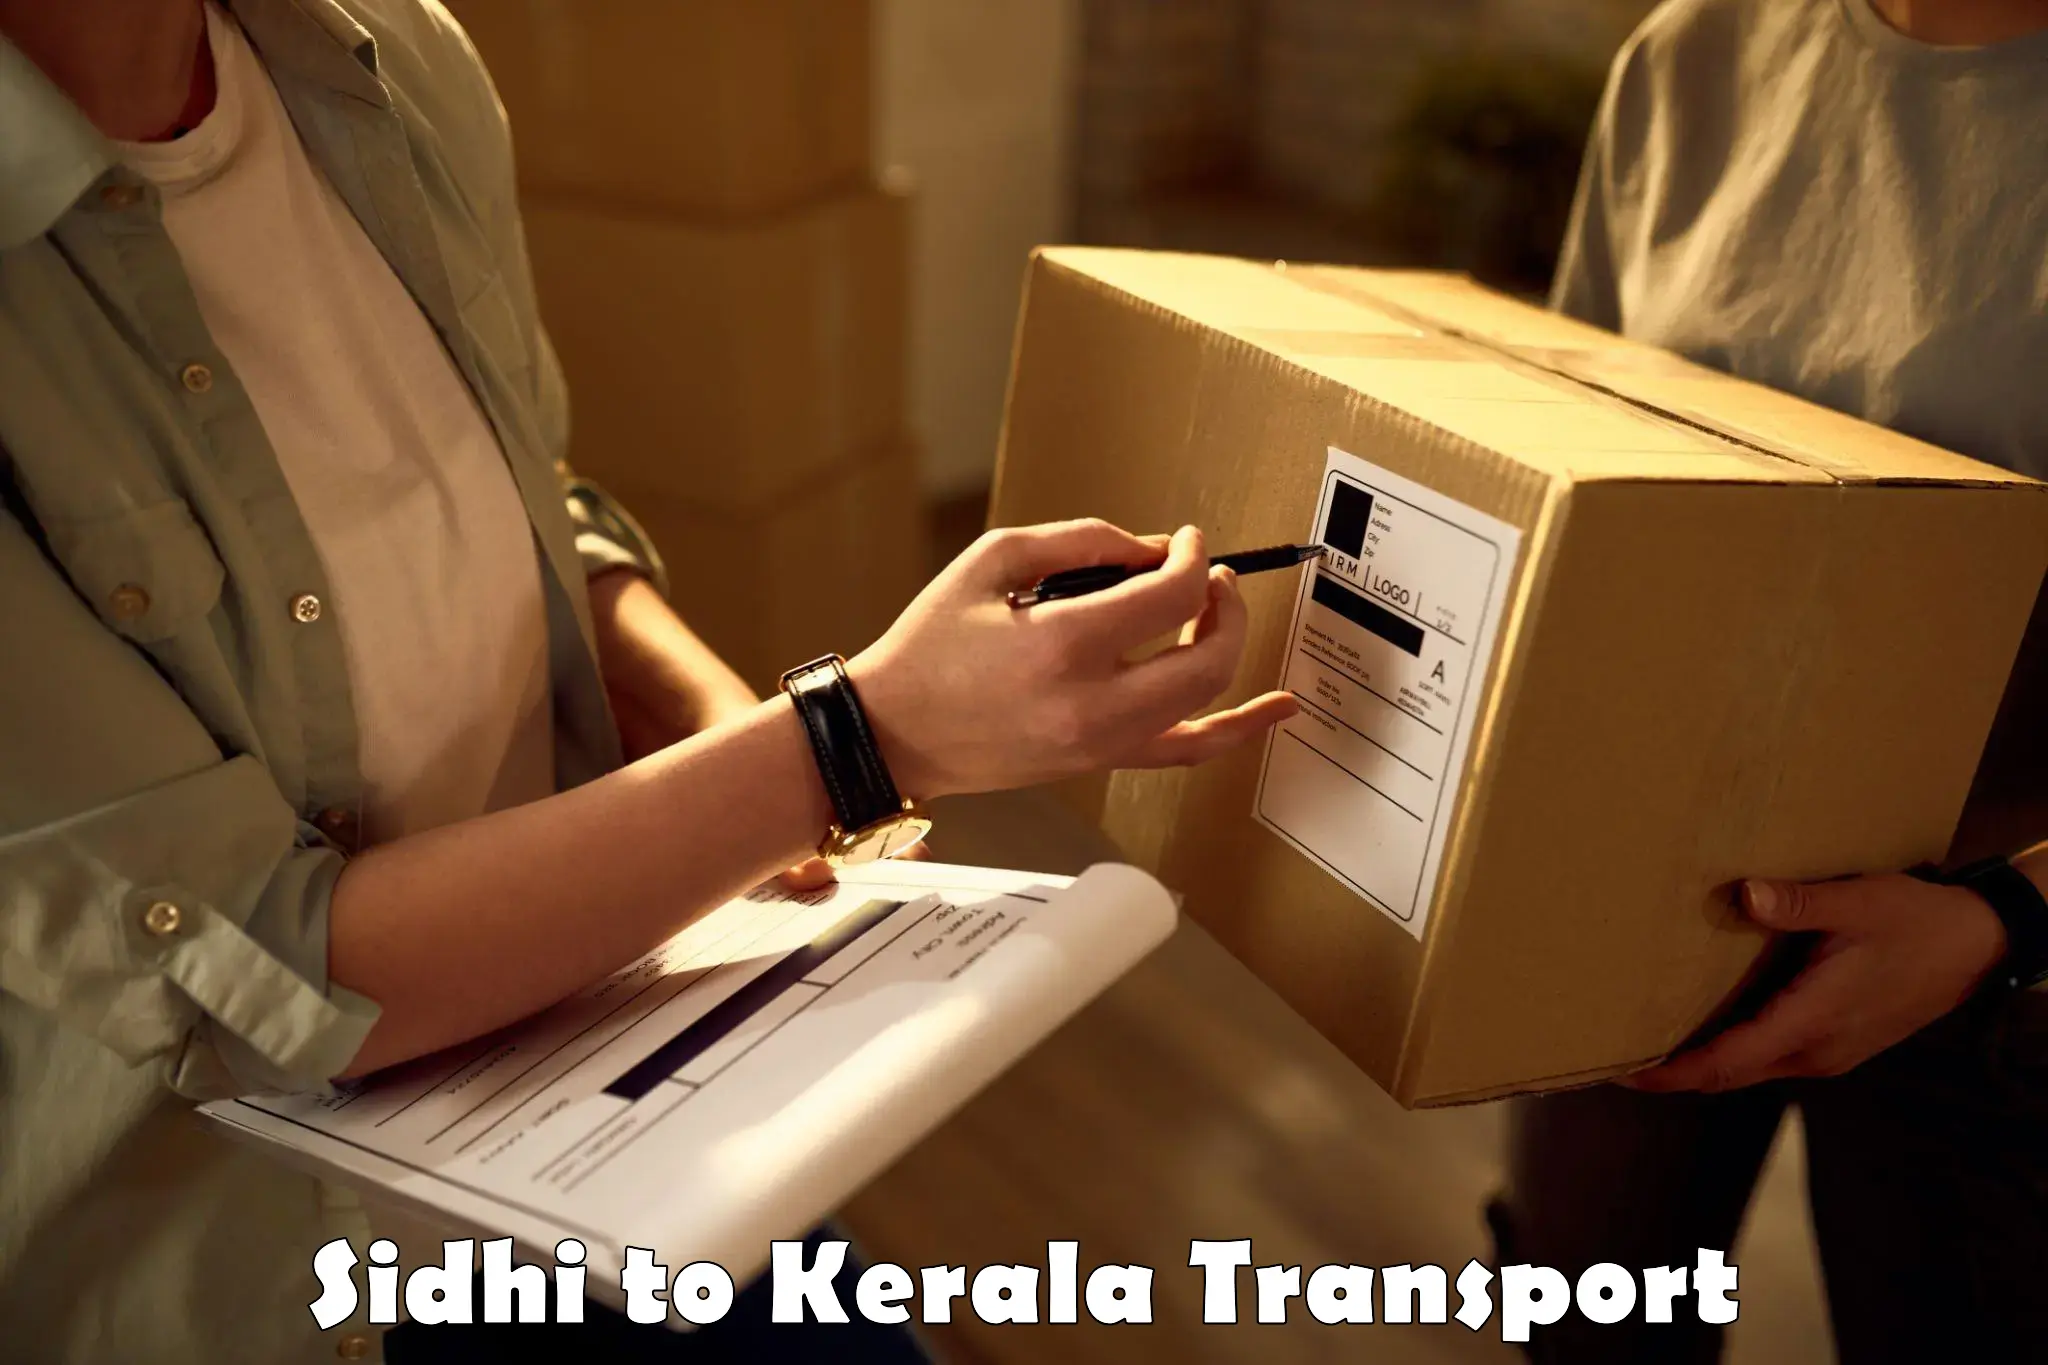 Commercial transport service Sidhi to Thrissur